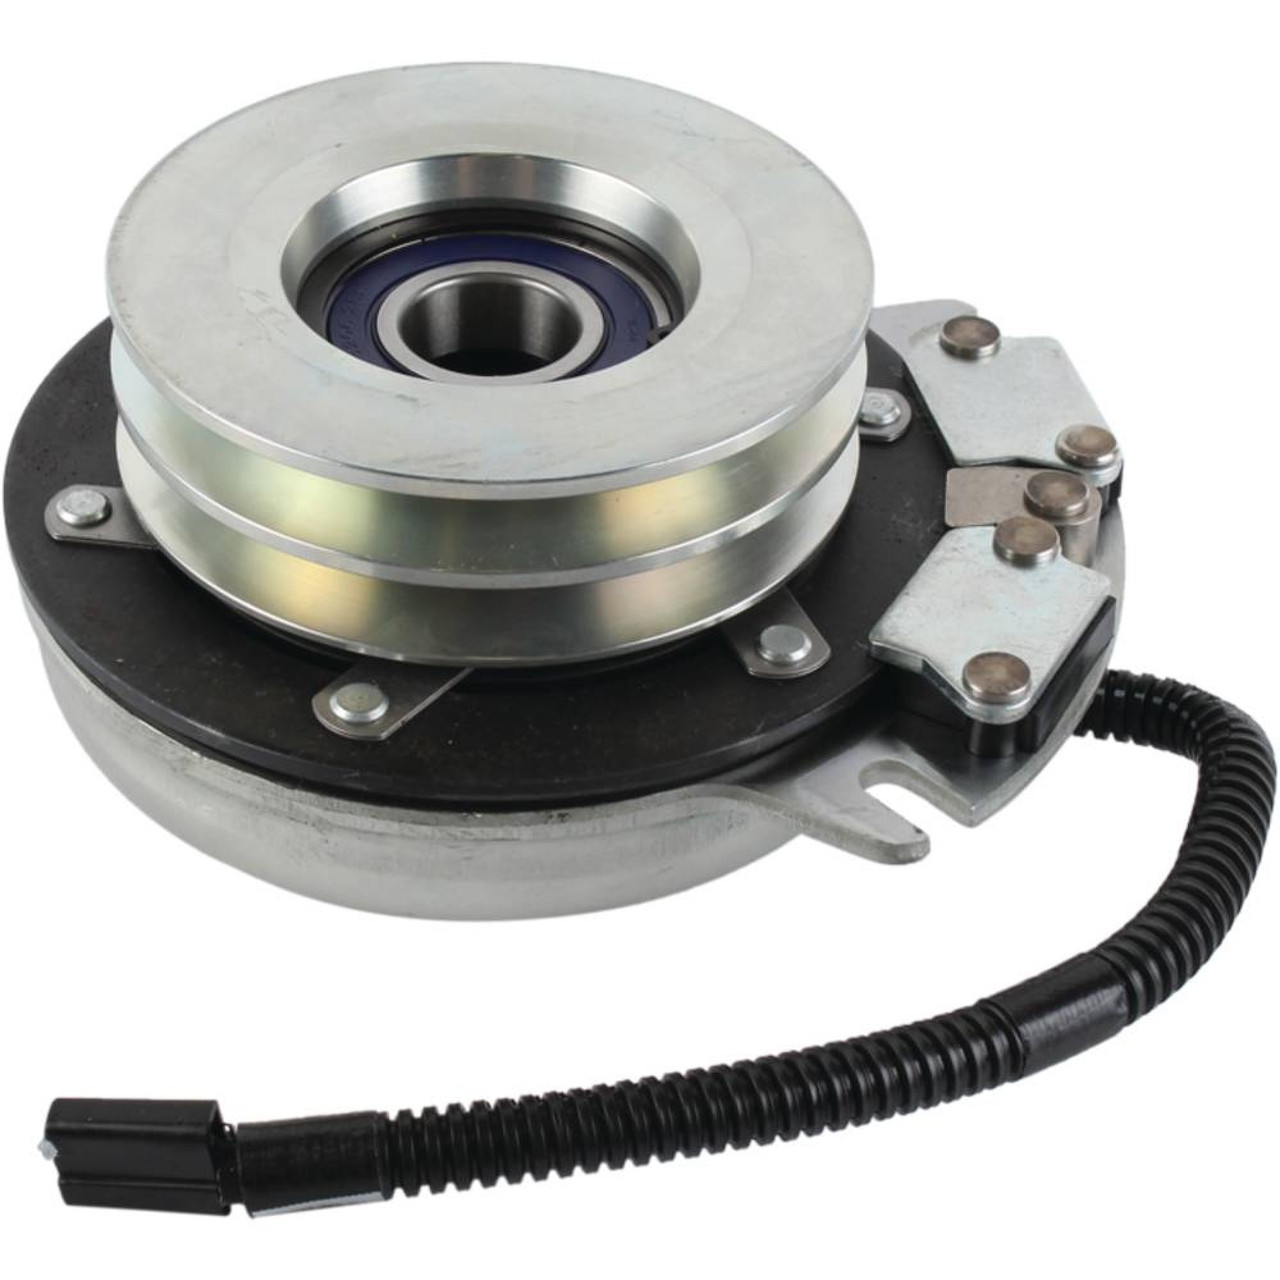 PTO Clutch For Woods Mow' n Machines 6182 - 6200 - 6215 - 6250